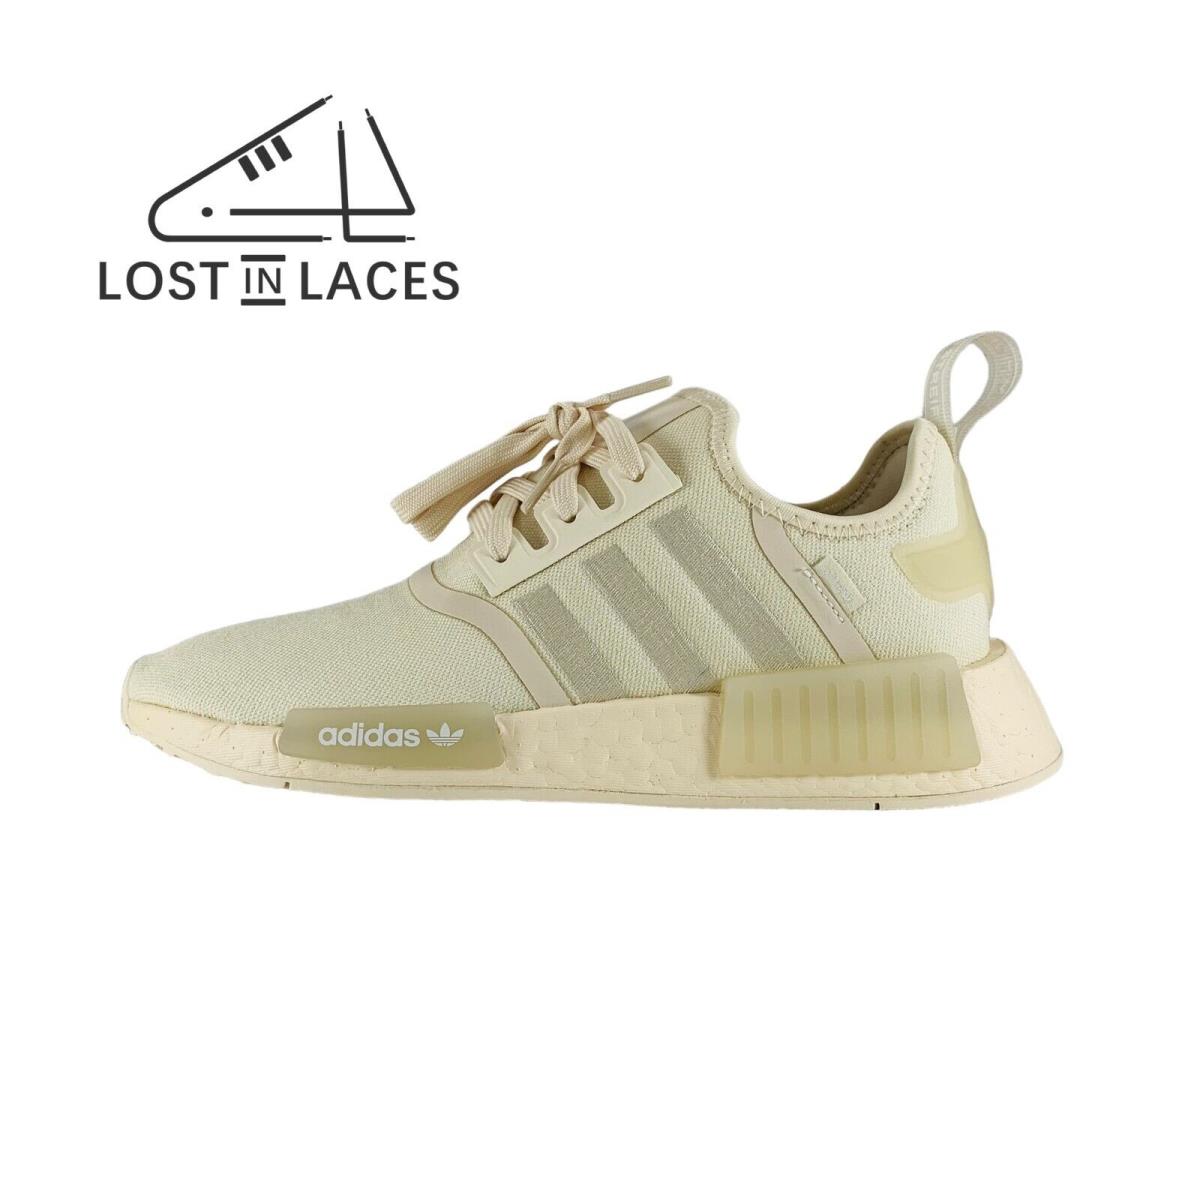 Adidas NMD_R1 Wonder White Beige Sneakers Shoes HQ4248 Women`s Sizes - Beige